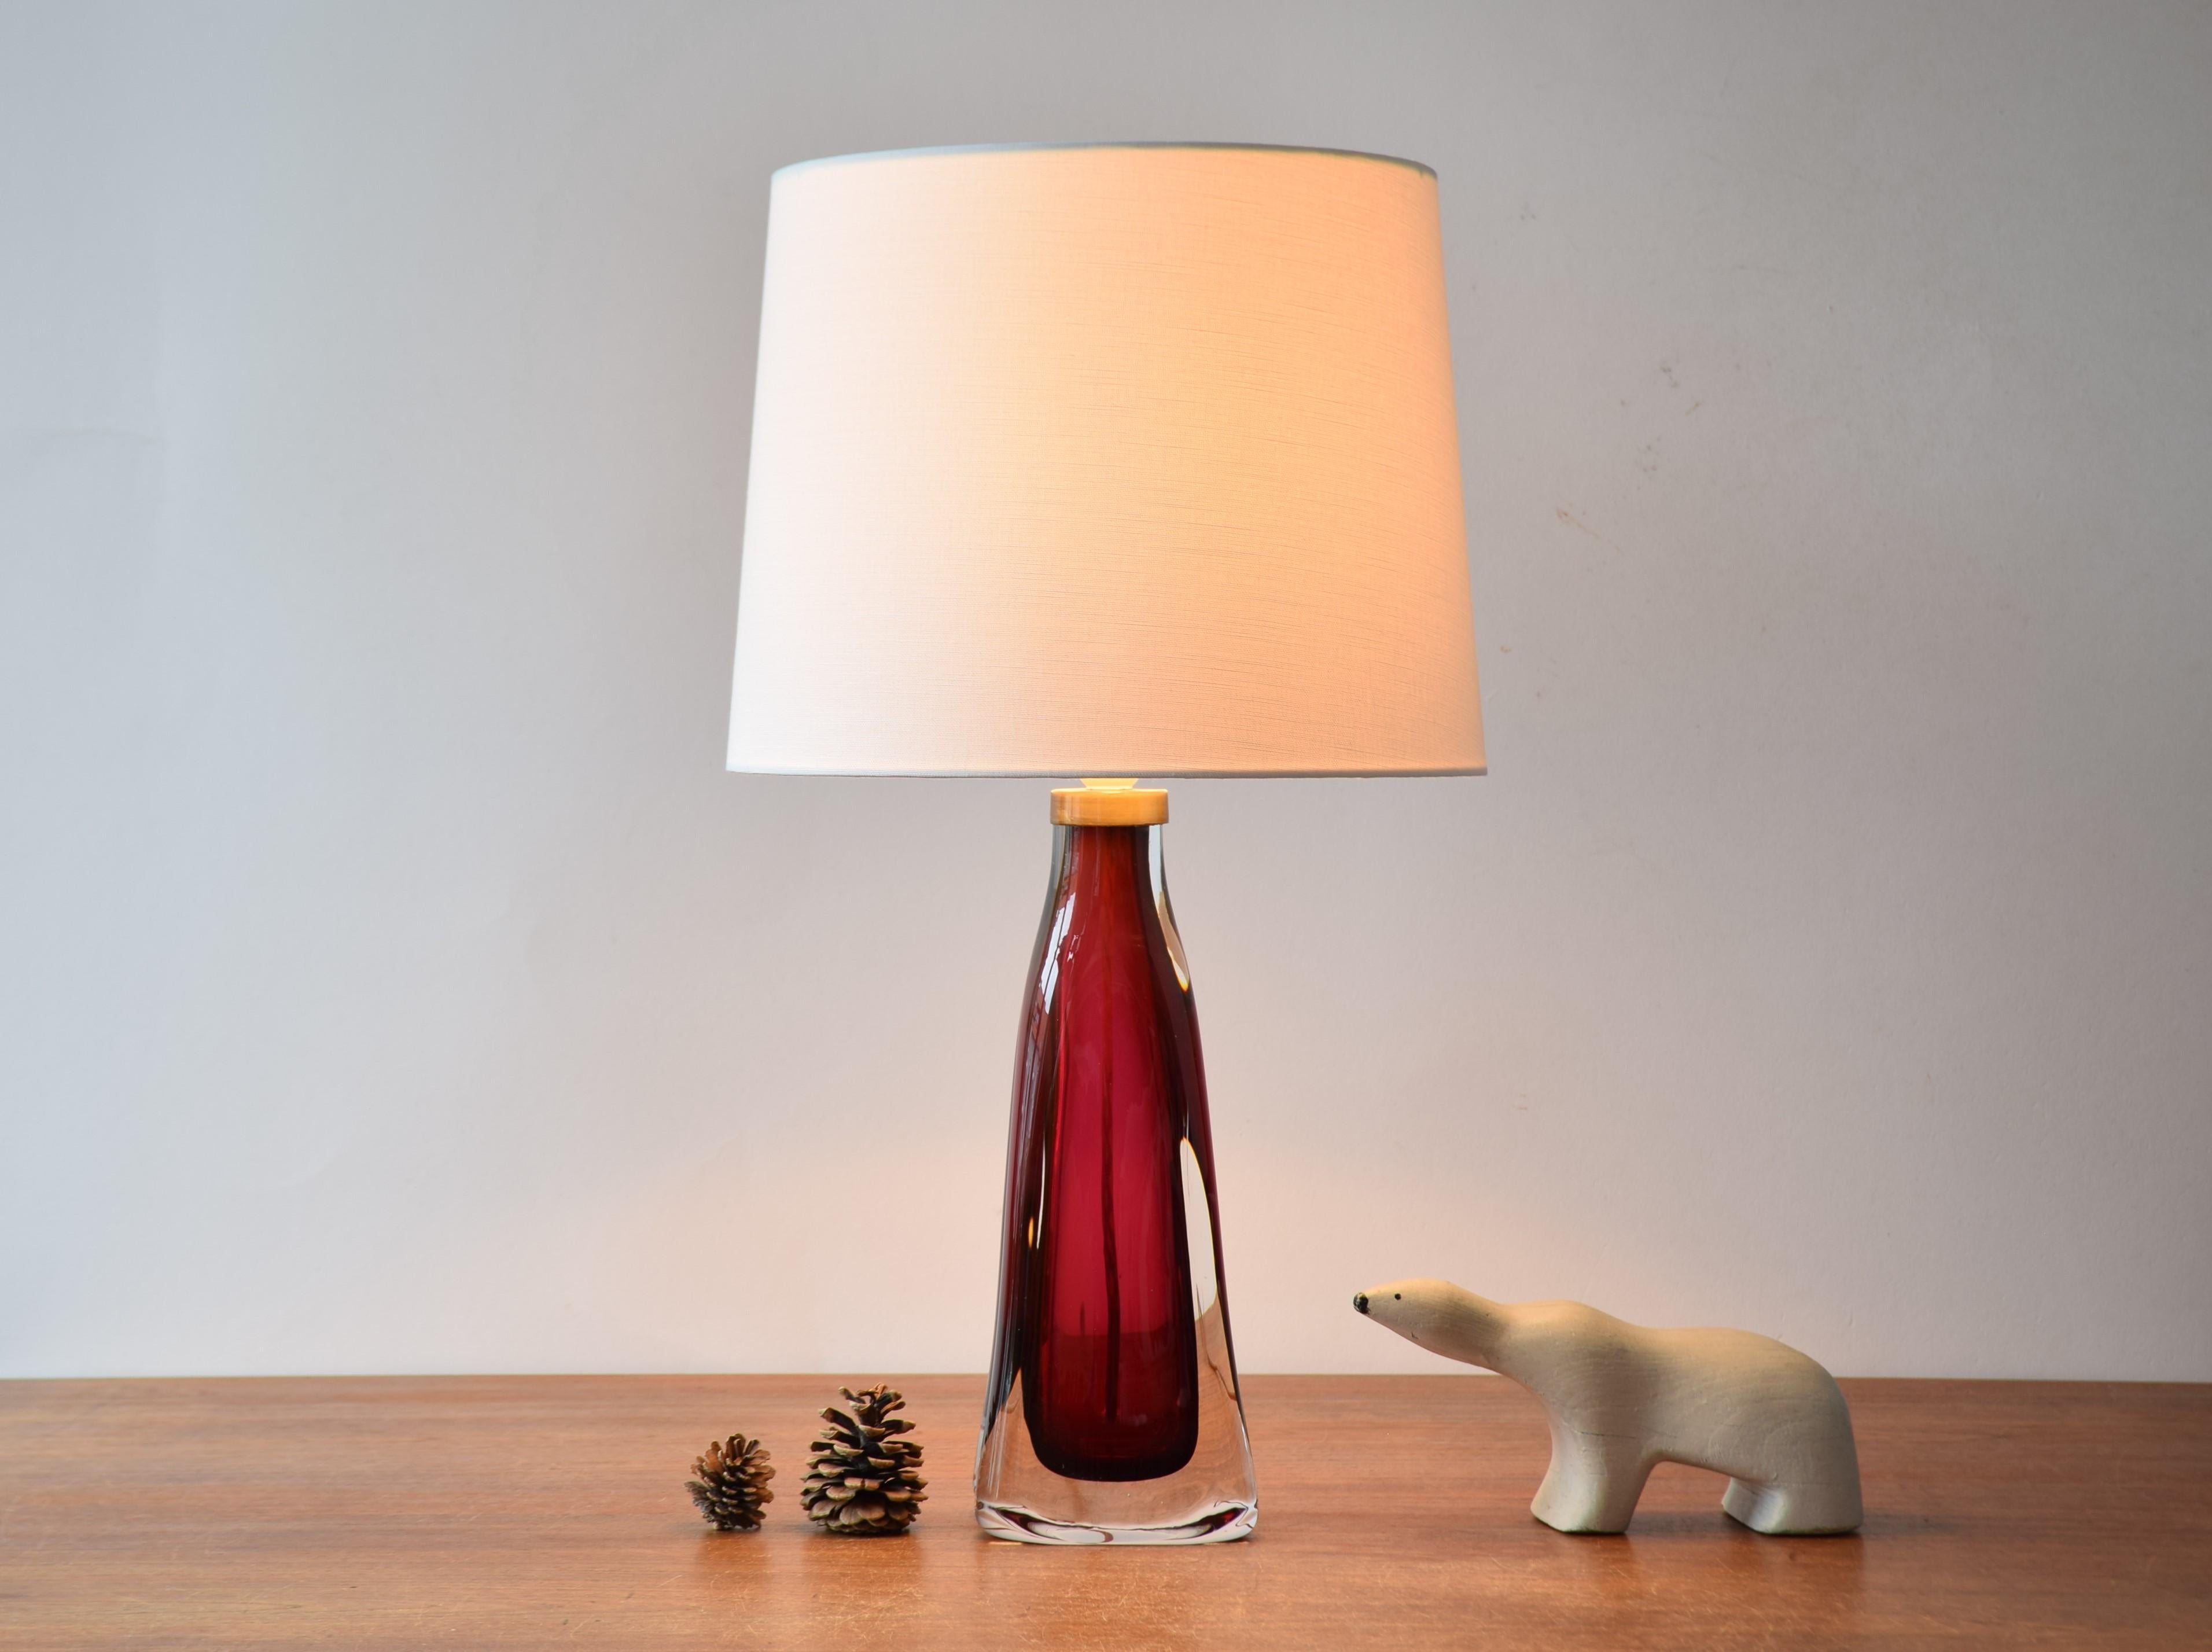 Tall mid-century crystal glass table lamp by Carl Fagerlund for Orrefors, Sweden. Made ca 1960s.

It has raspberry red and clear glass and a brass top. 

The lamp comes with a new lampshade designed and made in Denmark. It is made of woven